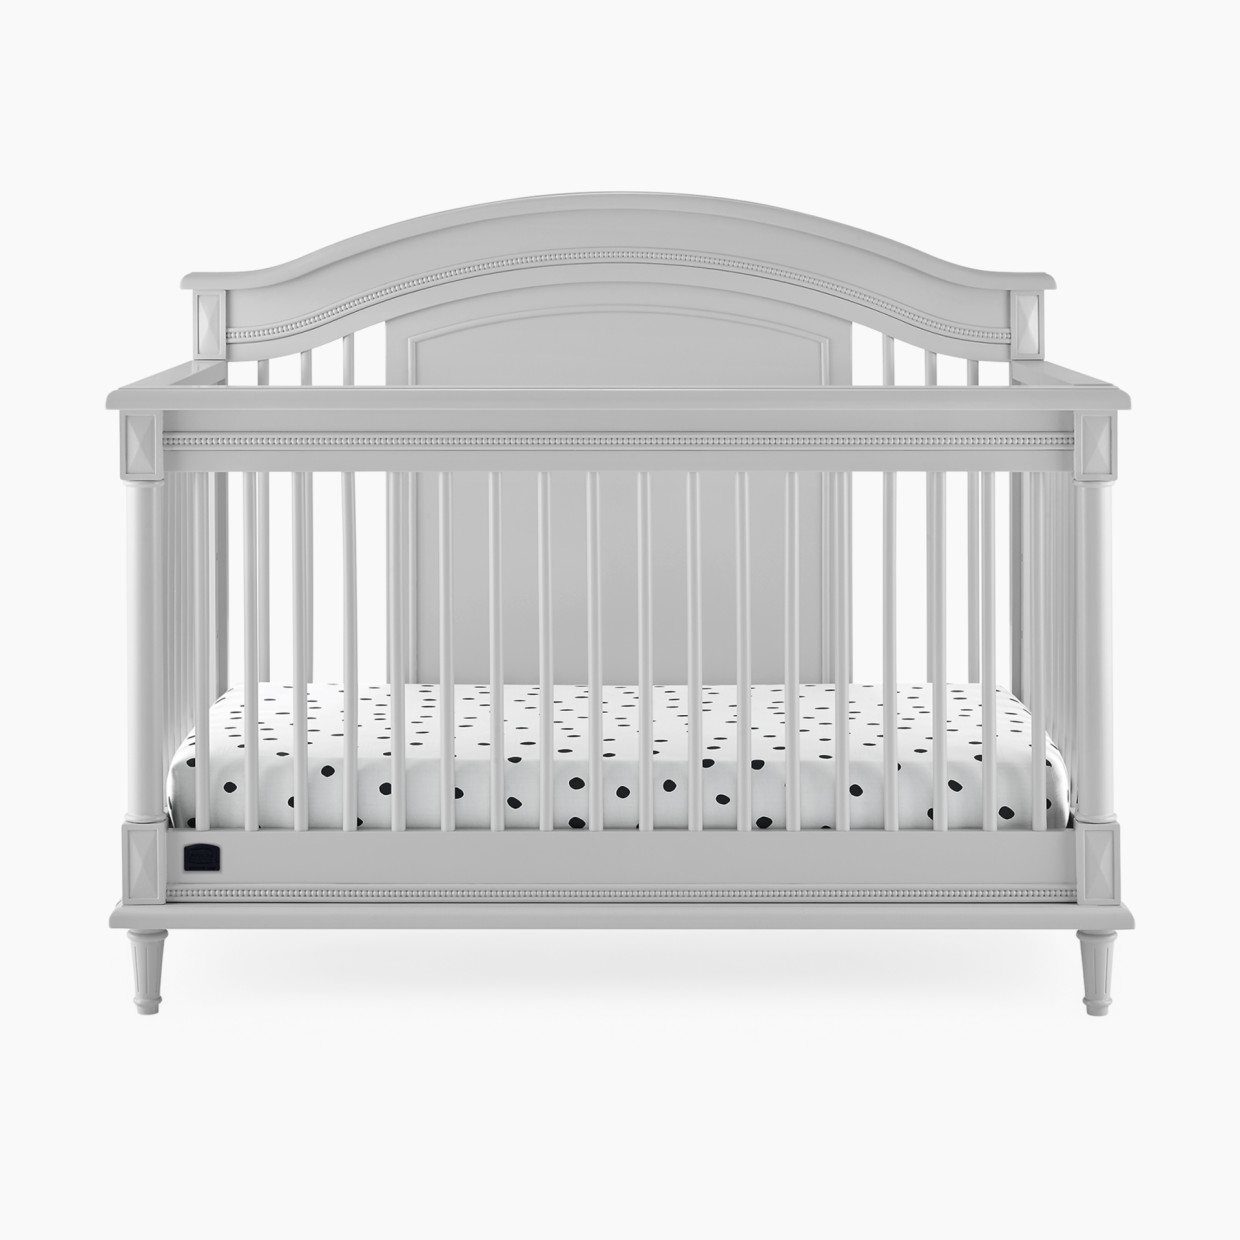 Simmons Kids Juliette 6-in-1 Convertible Crib with Toddler Rail - Moonstruck Grey.